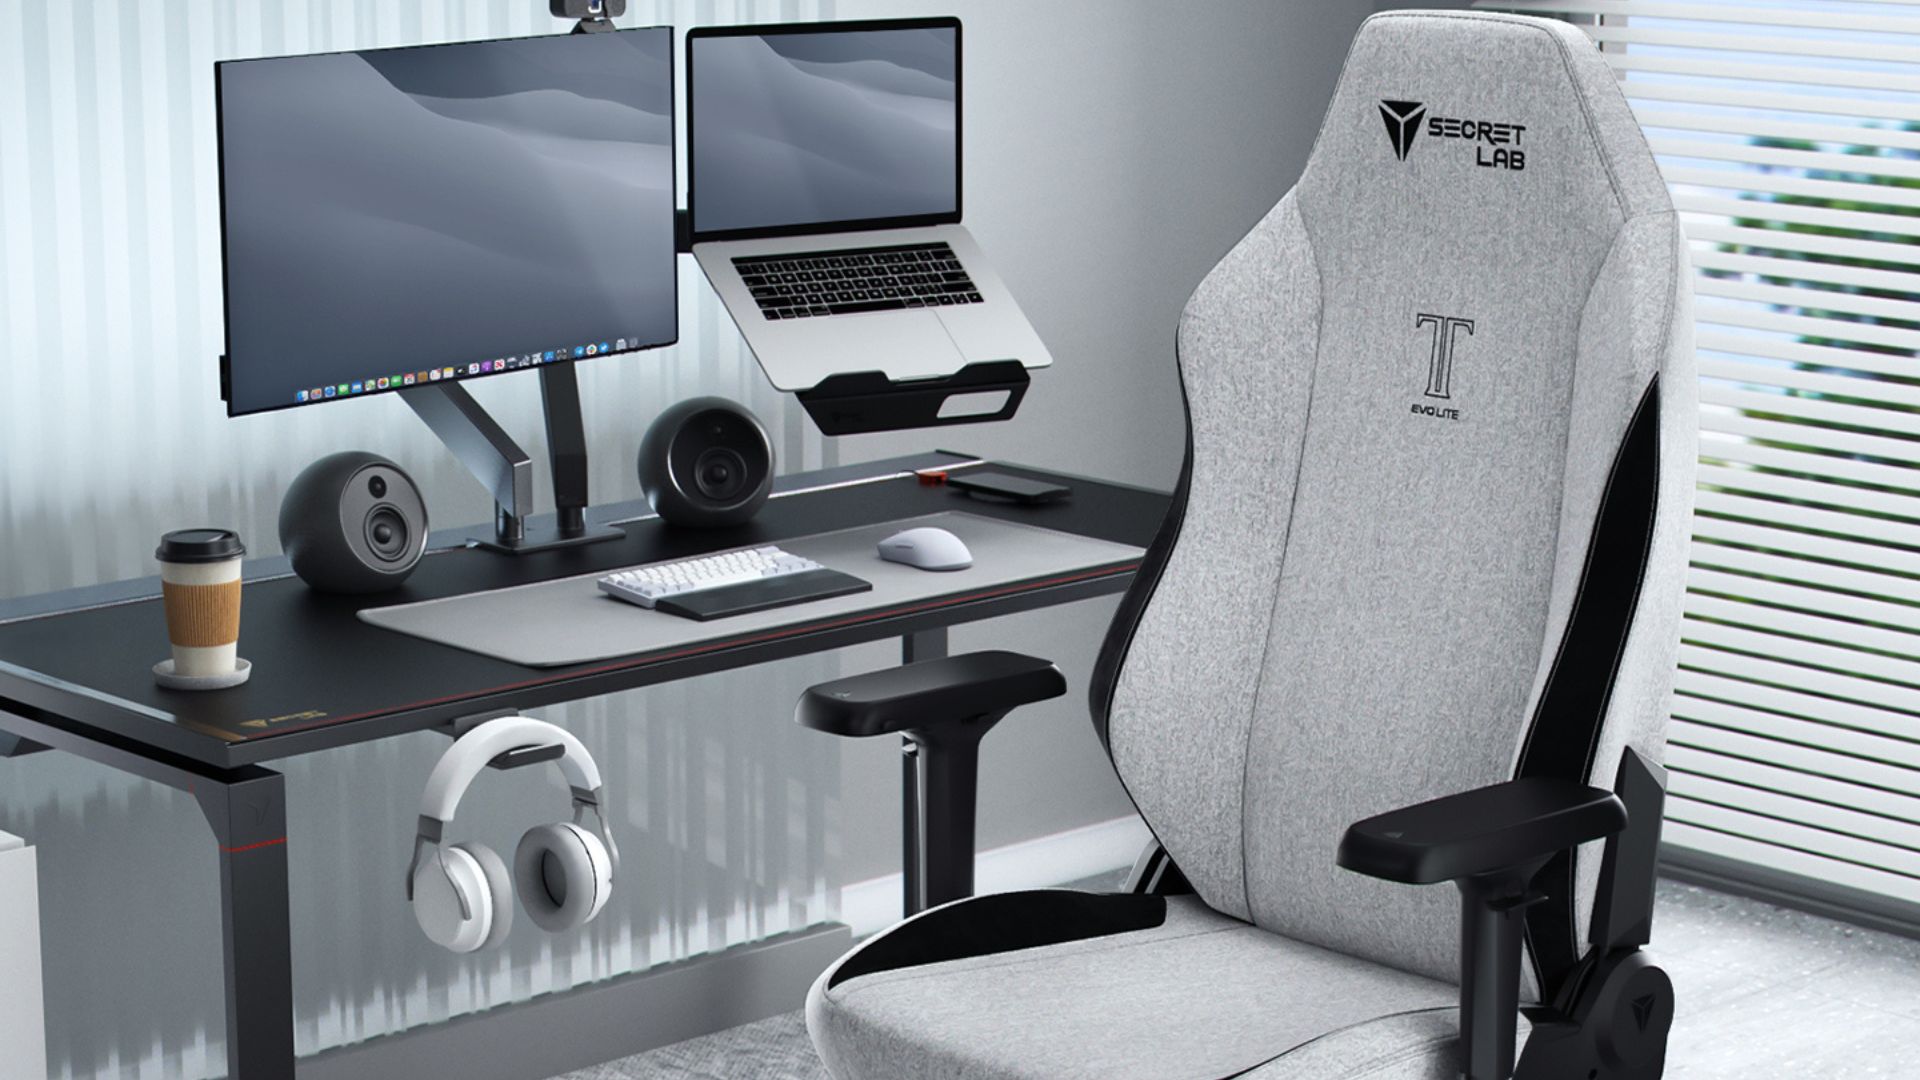 Secretlab finally has a new gaming chair, and it's a bit 'lighter' on your  wallet